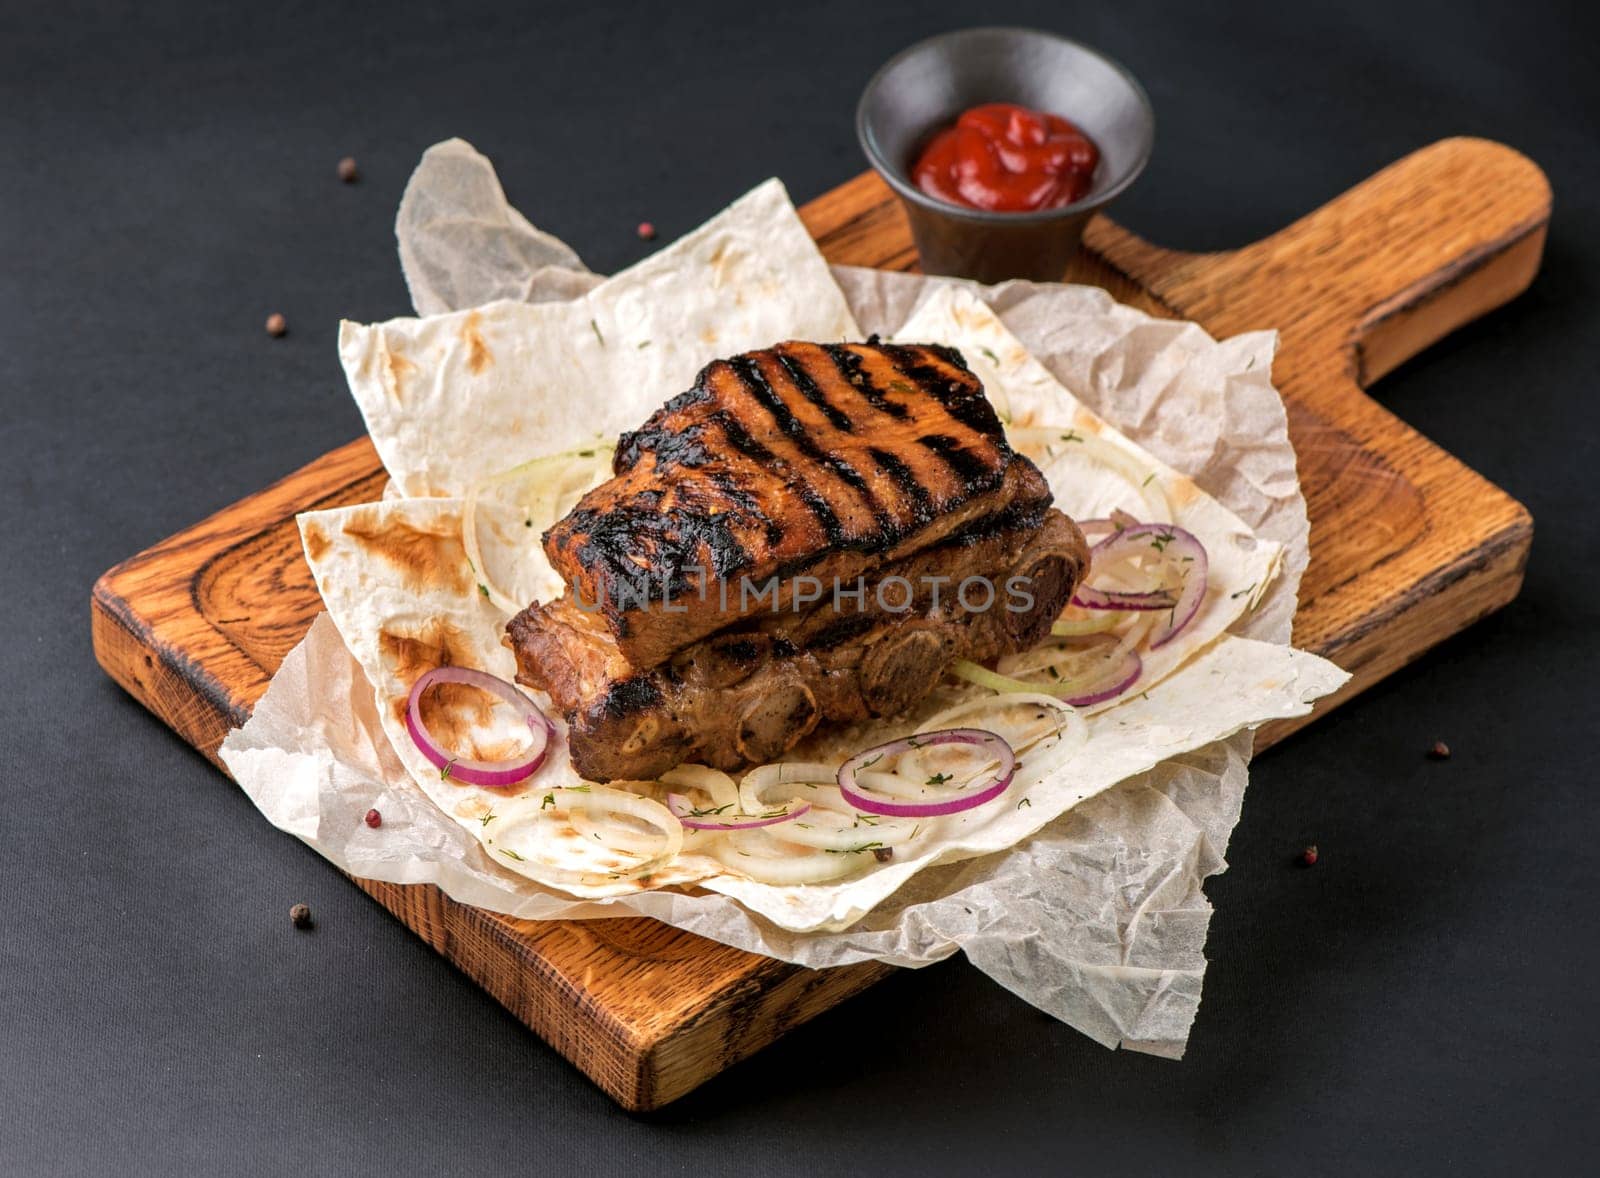 Close up of spicy grilled spare ribs on dark background with copy space. Meat on a wooden board by aprilphoto